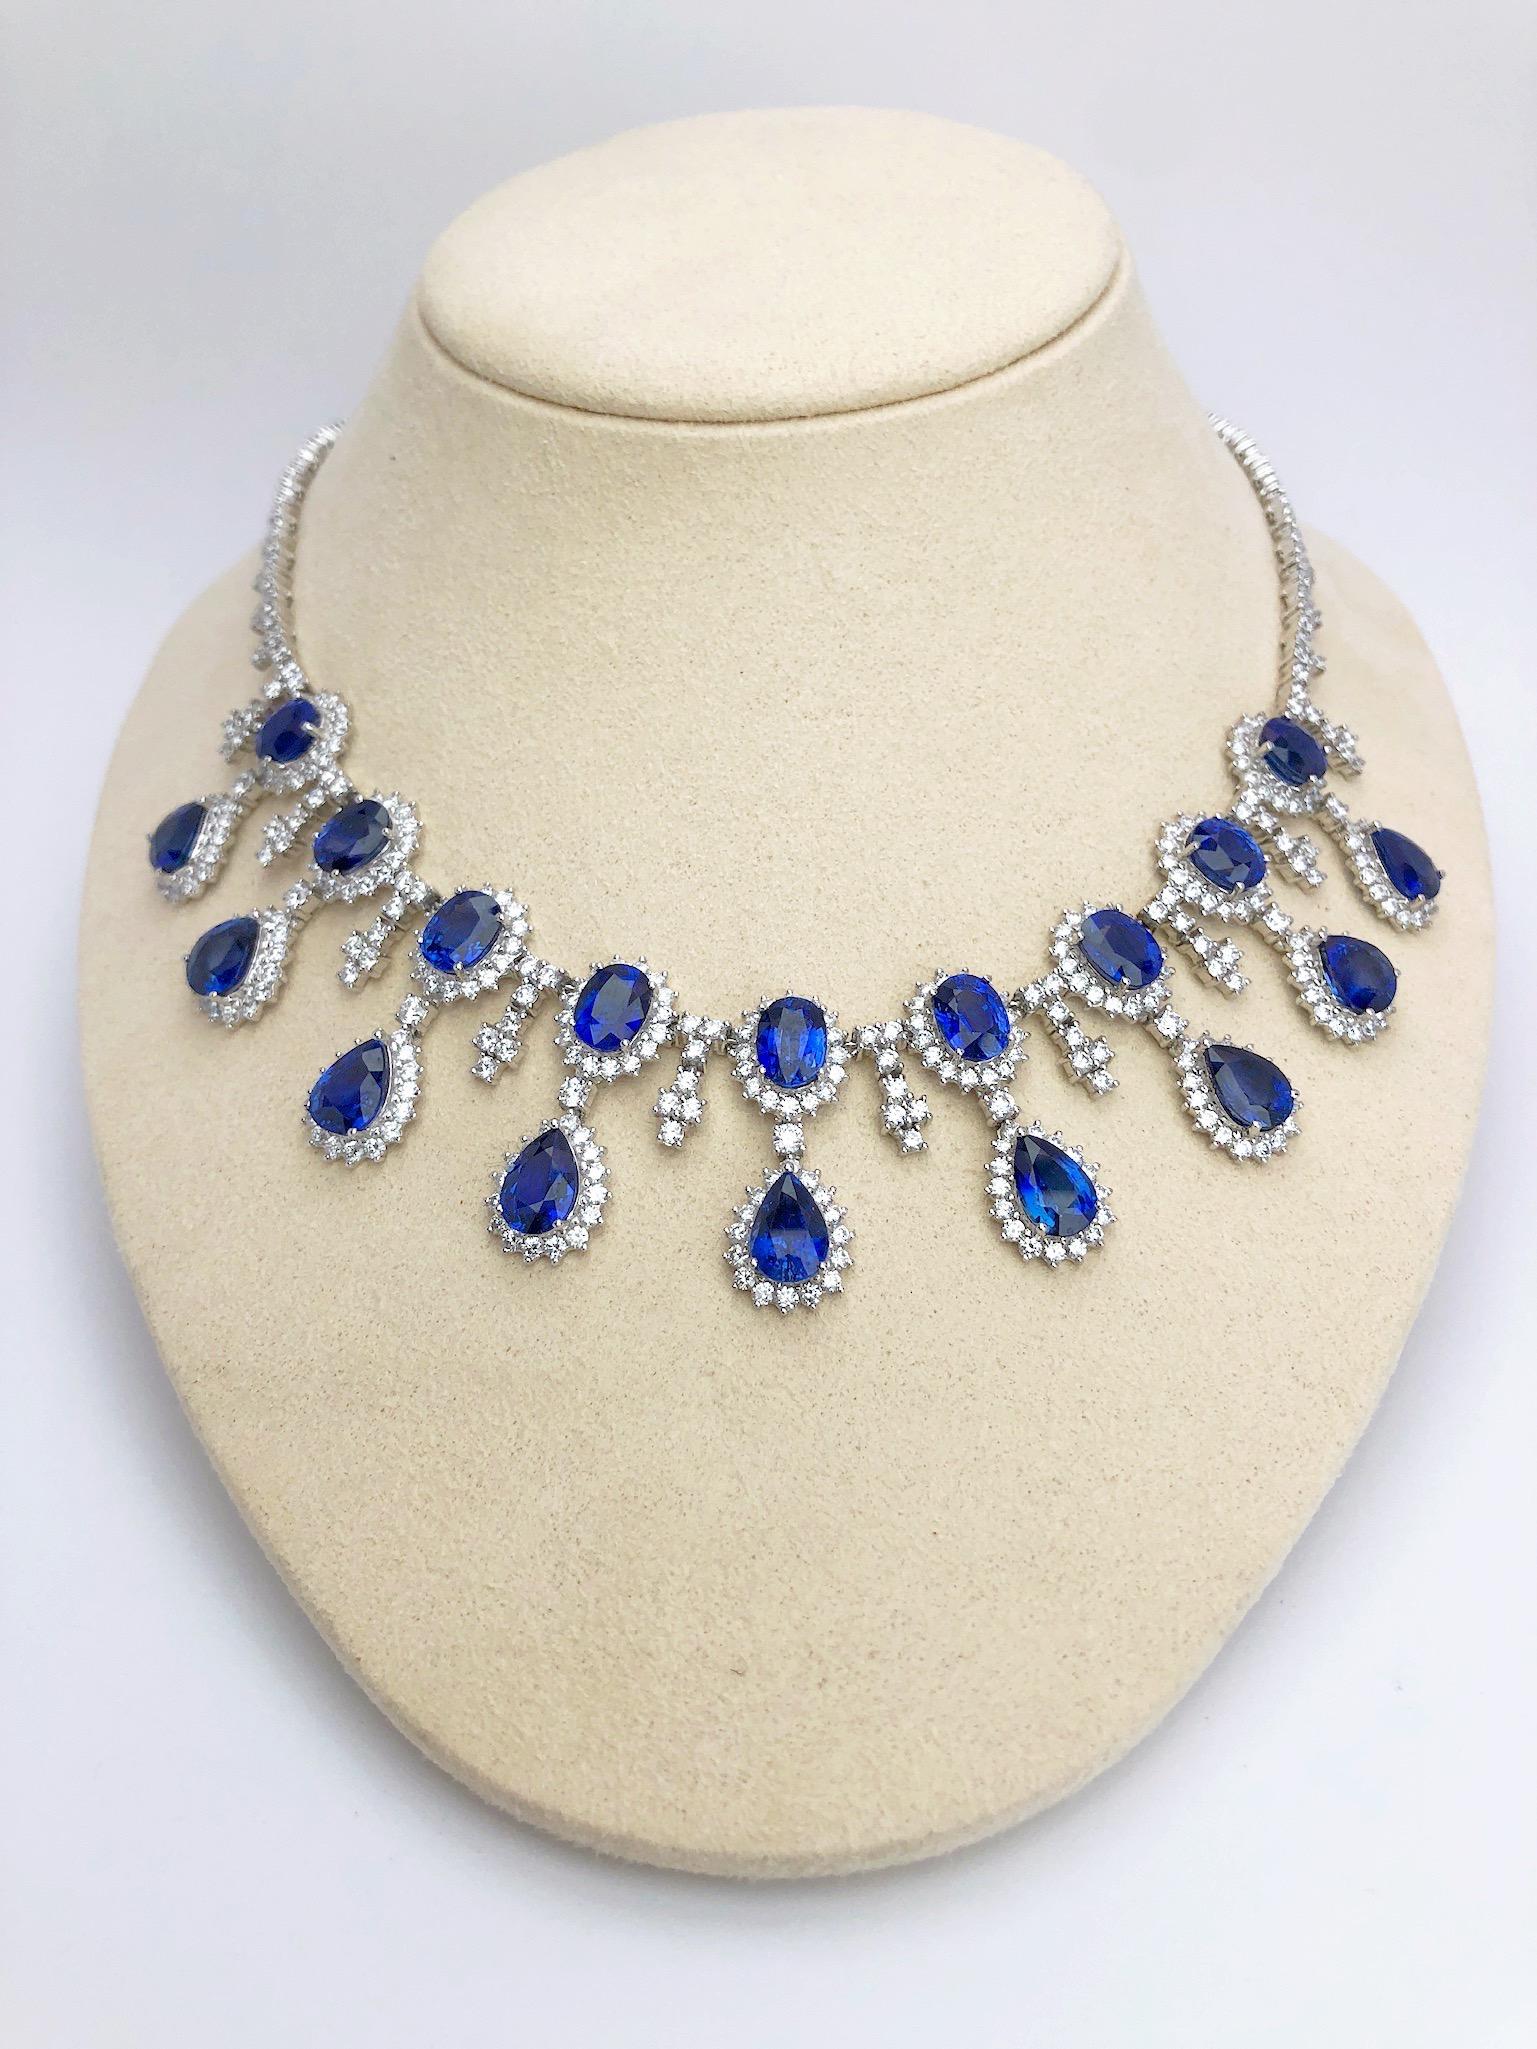 37.93 carats of oval and pear shape sapphires are framed with 12.89 carats of round brilliants in this show-stopping important necklace.
Set in 18-karat white gold.
508 Diamonds = 13.89 carats
18 Blue Sapphires = 37.93 carats
Total length